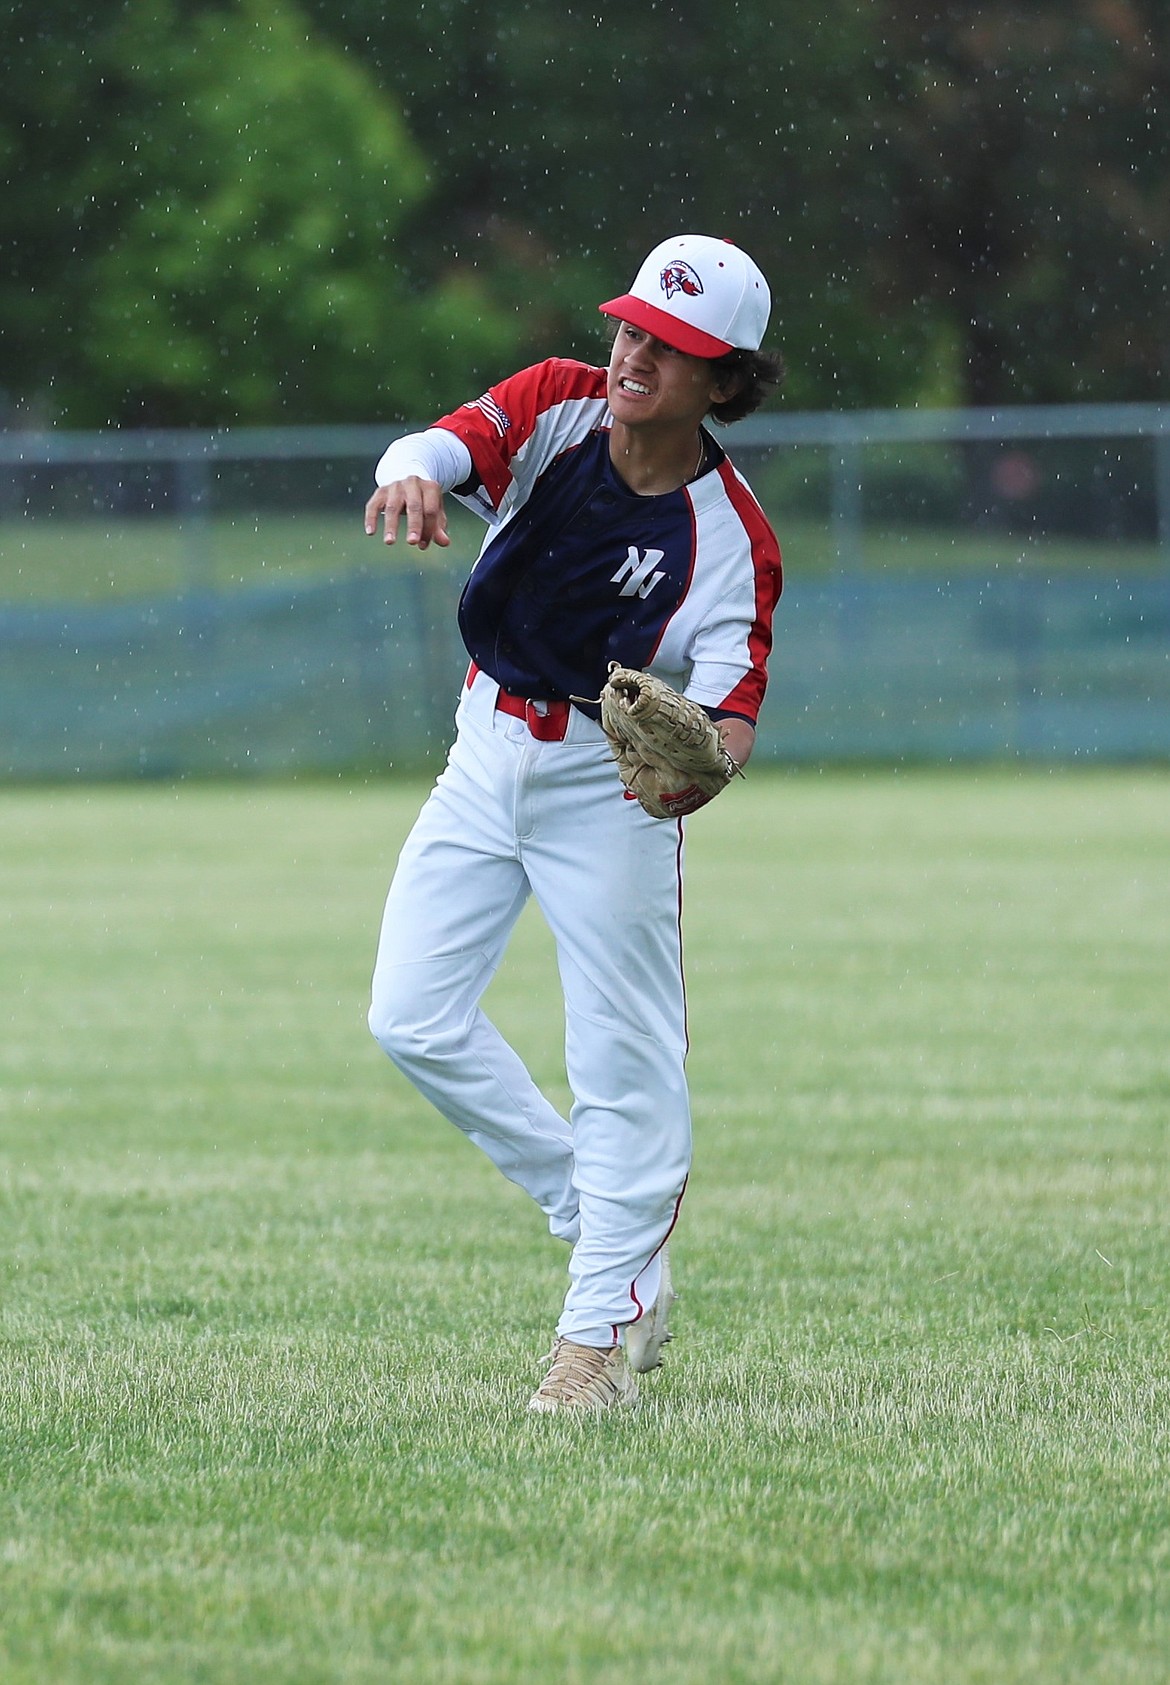 Kaipoi Wong-Yuen makes a throw from the outfield during Saturday's doubleheader.